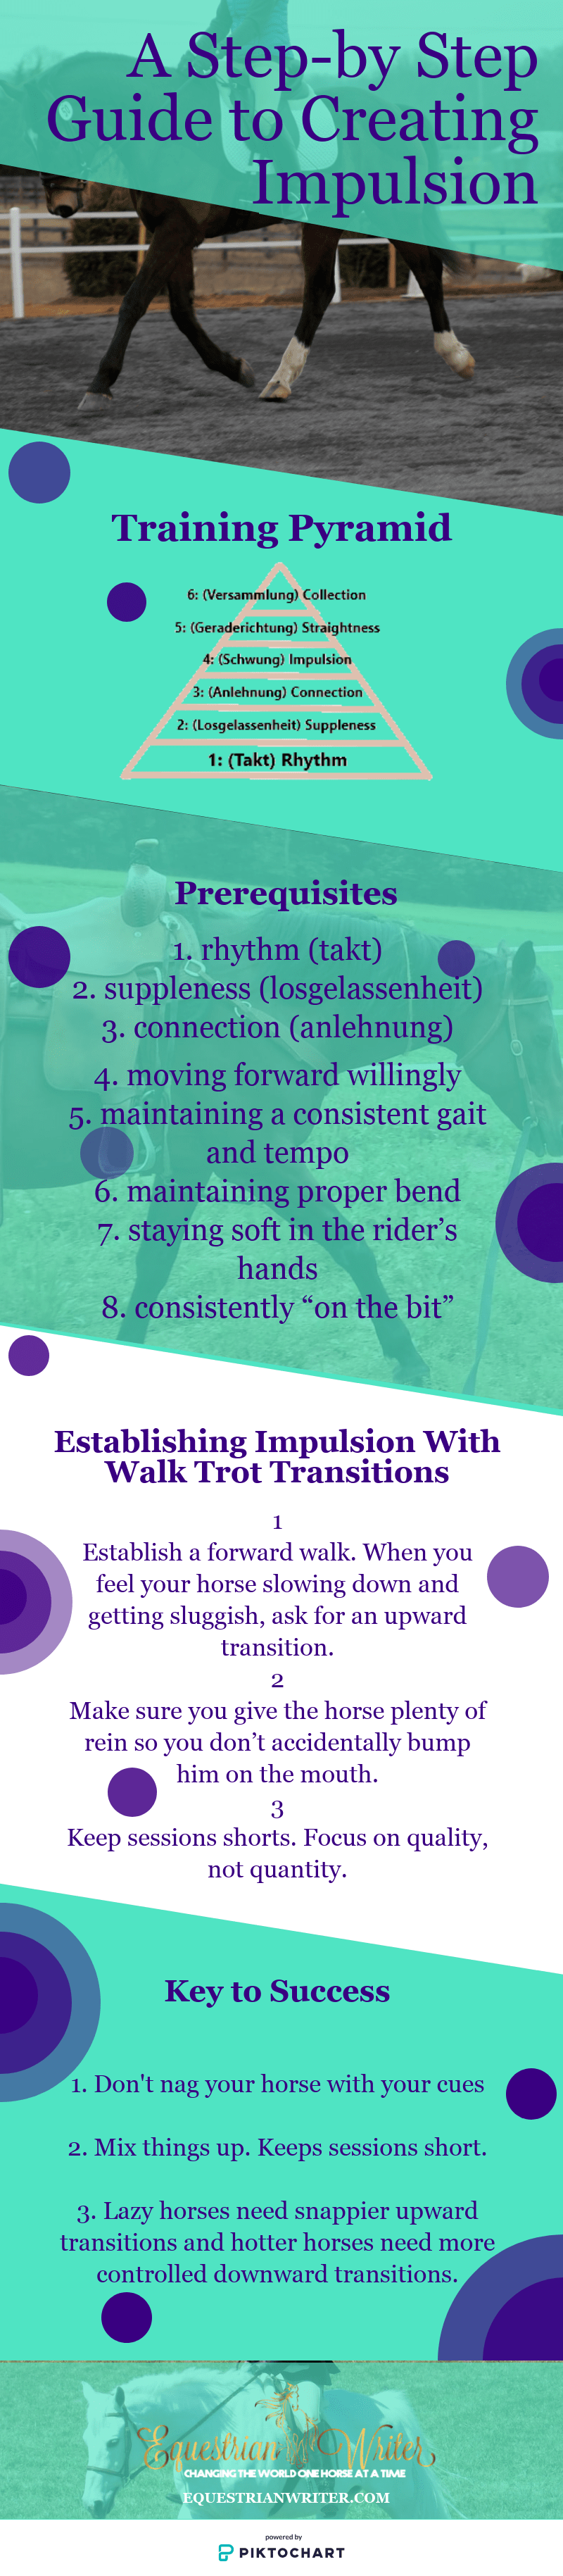 Use this step-by-step guide to create impulsion in your horse and move one step closure to achieving true collection. #horses #horsetraining #dressage #dressagetraining #collection #trainingcollection